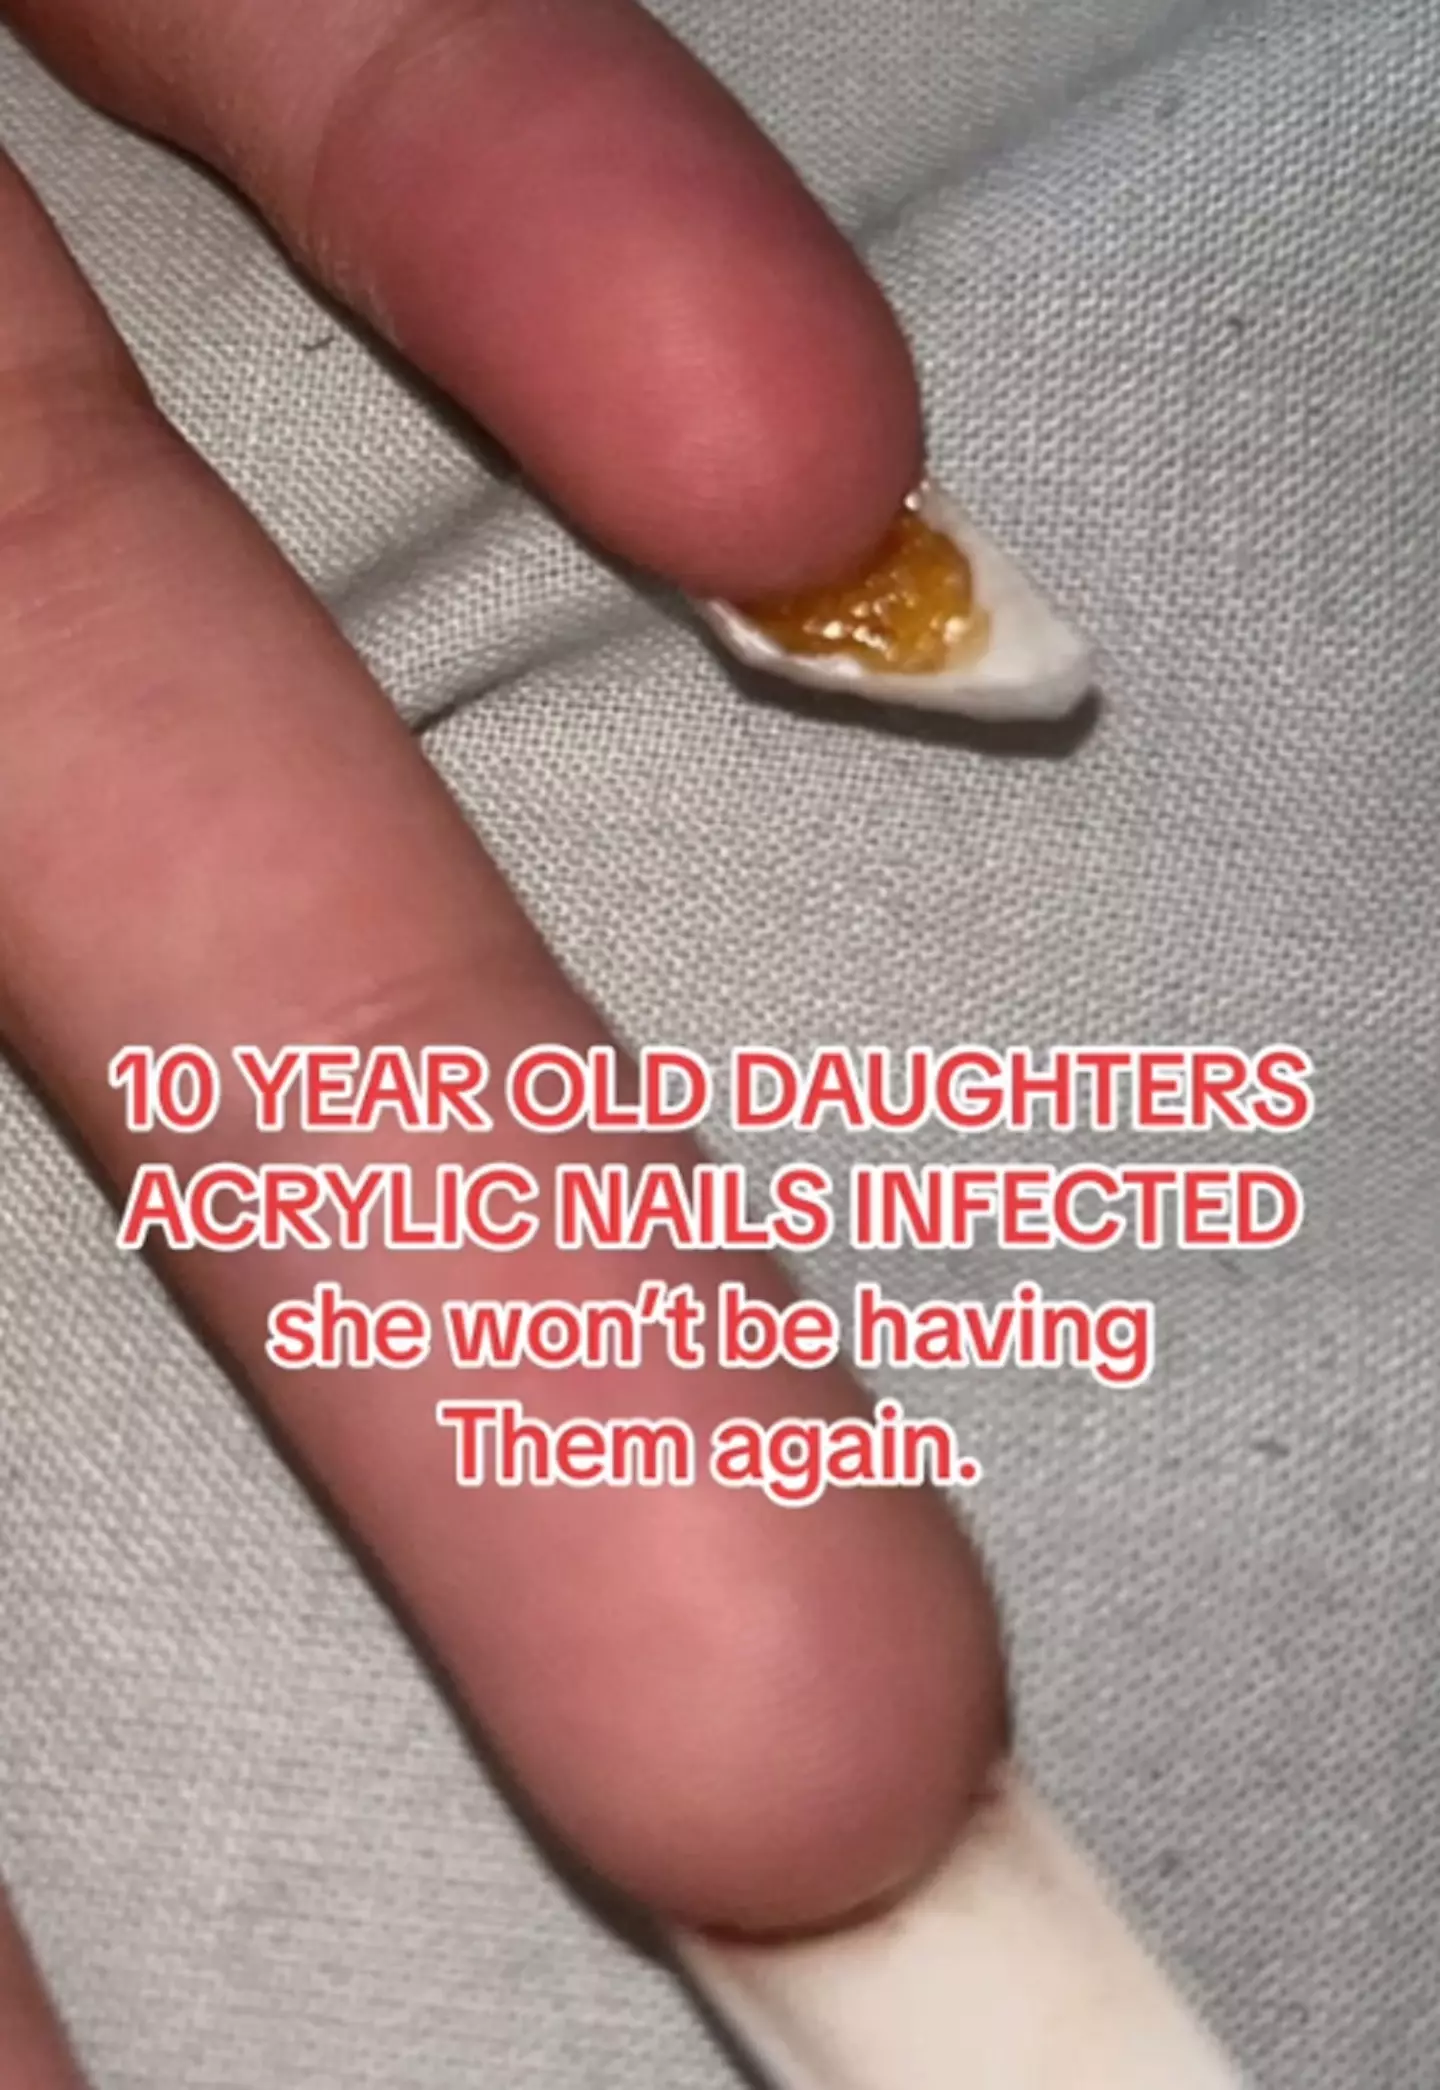 The nails became infected and caused the girl a lot of pain.